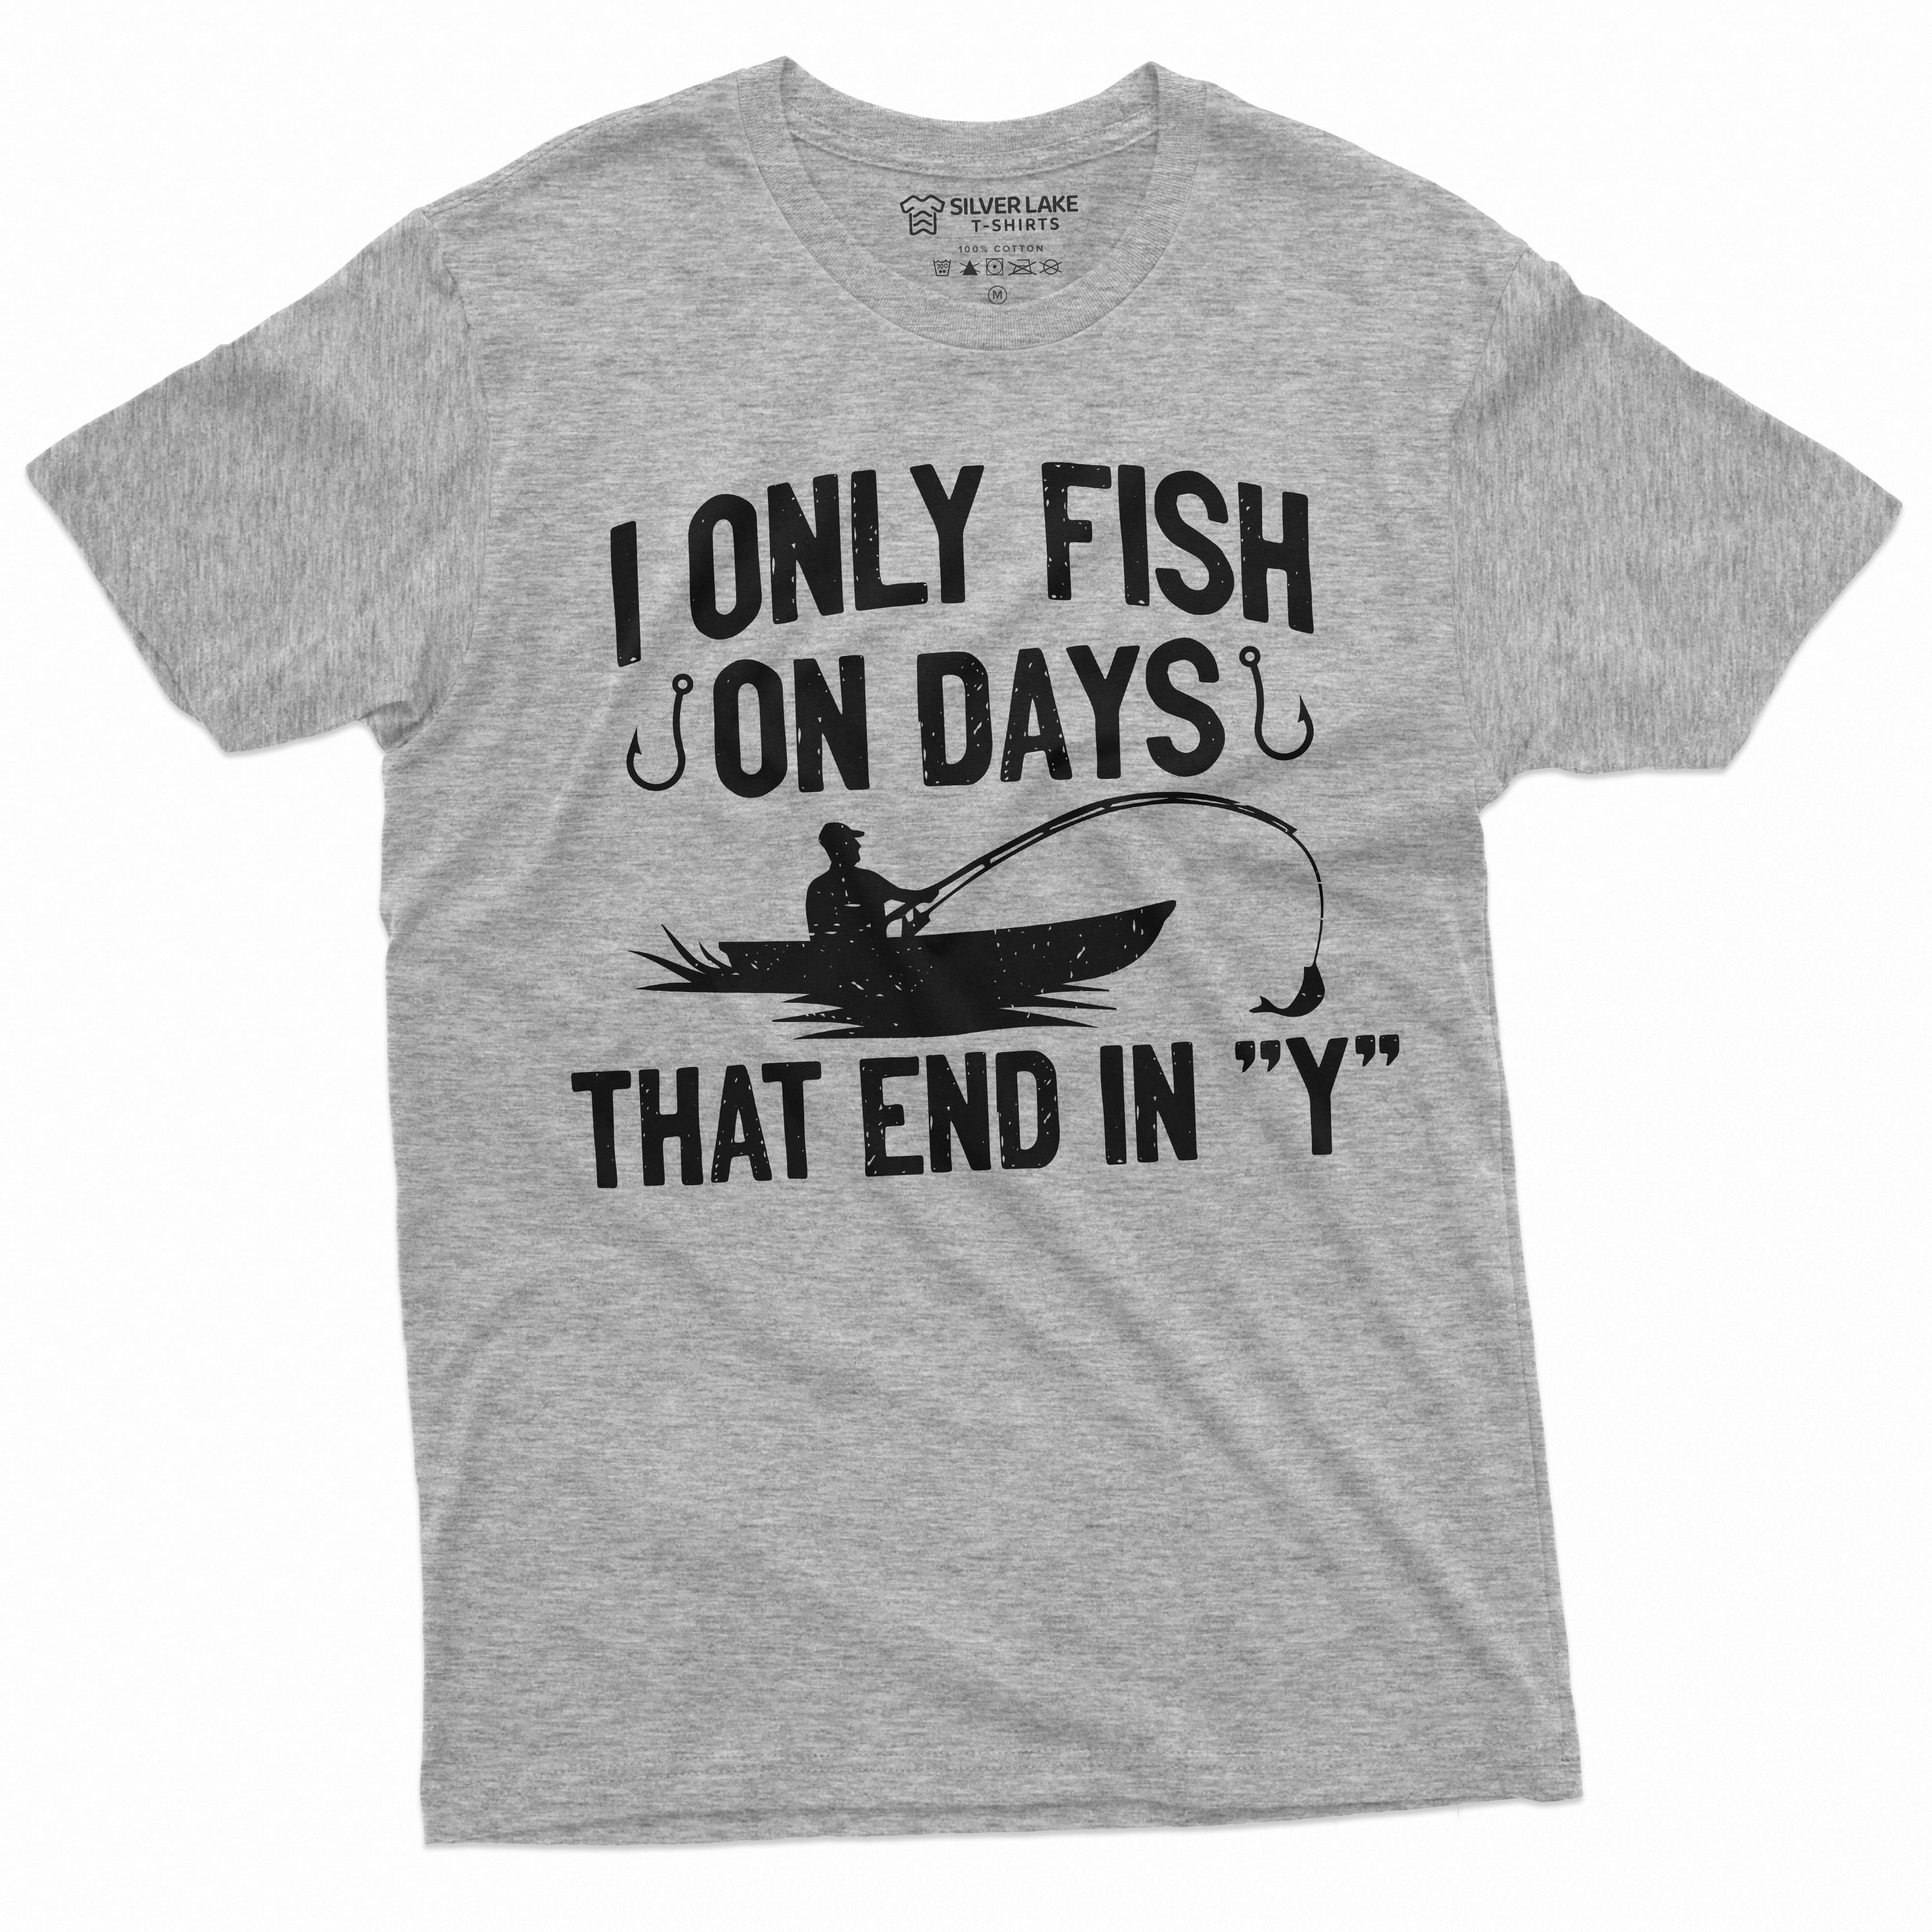 Father Son Fishing Shirts Matching Father and Son Fishing, Father Son  Fishing T, Father and Son Fishing Tshirt, . Father's Day, Fathers Days 